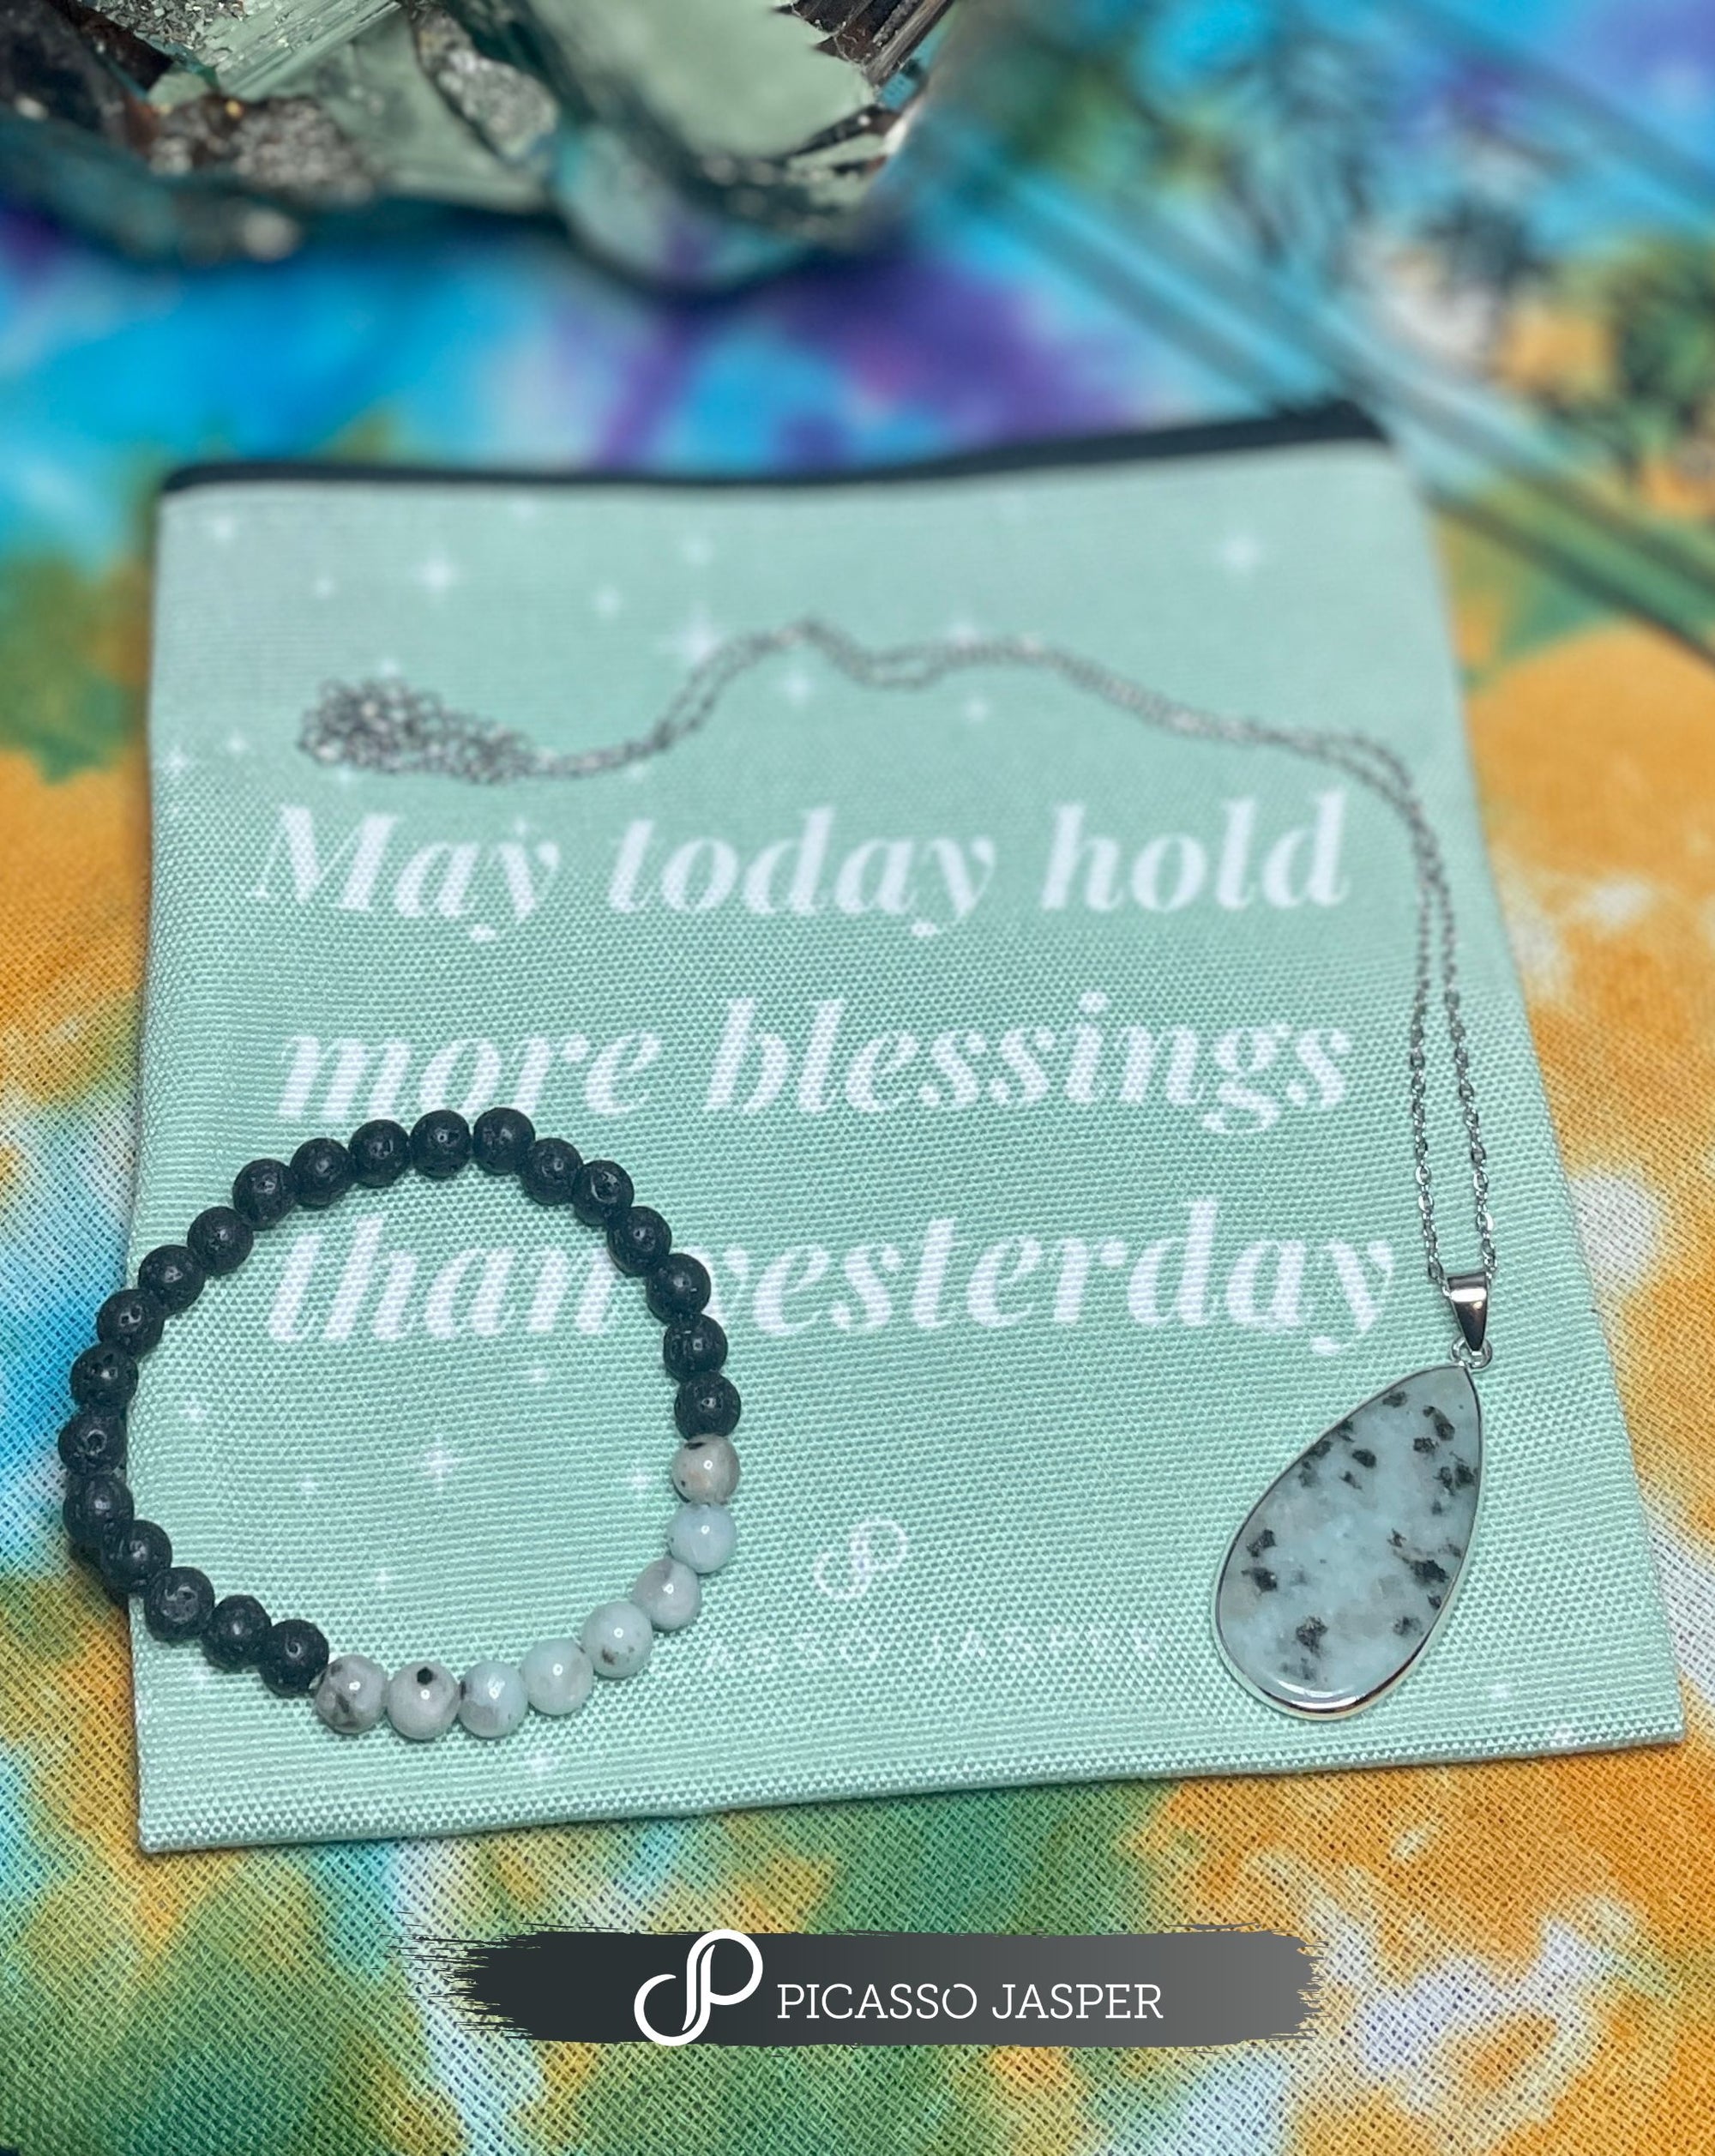 Last Few! May Today Hold More Blessings - SAGED & STONED Ritual Bundle